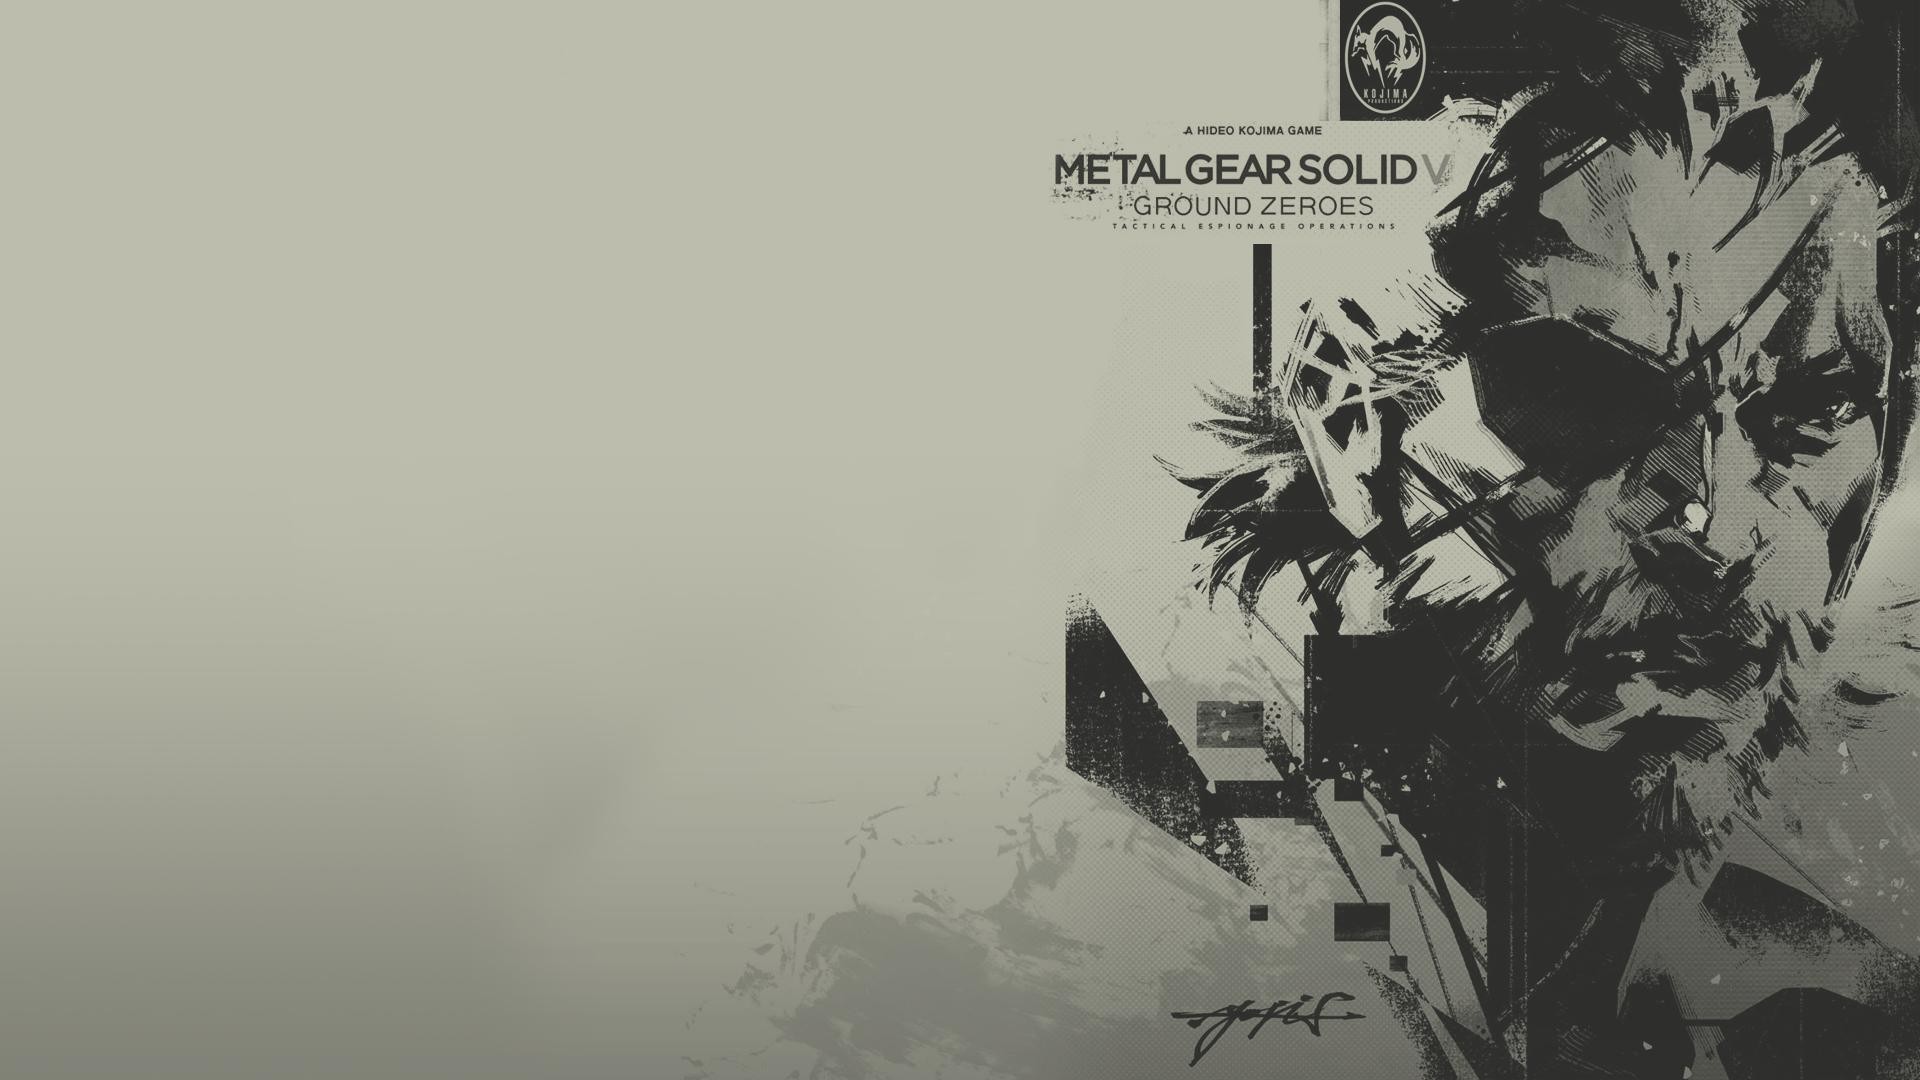 General 1920x1080 Metal Gear Solid Metal Gear Solid V: Ground Zeroes Big Boss Metal Gear video games video game art monochrome eyepatches video game men